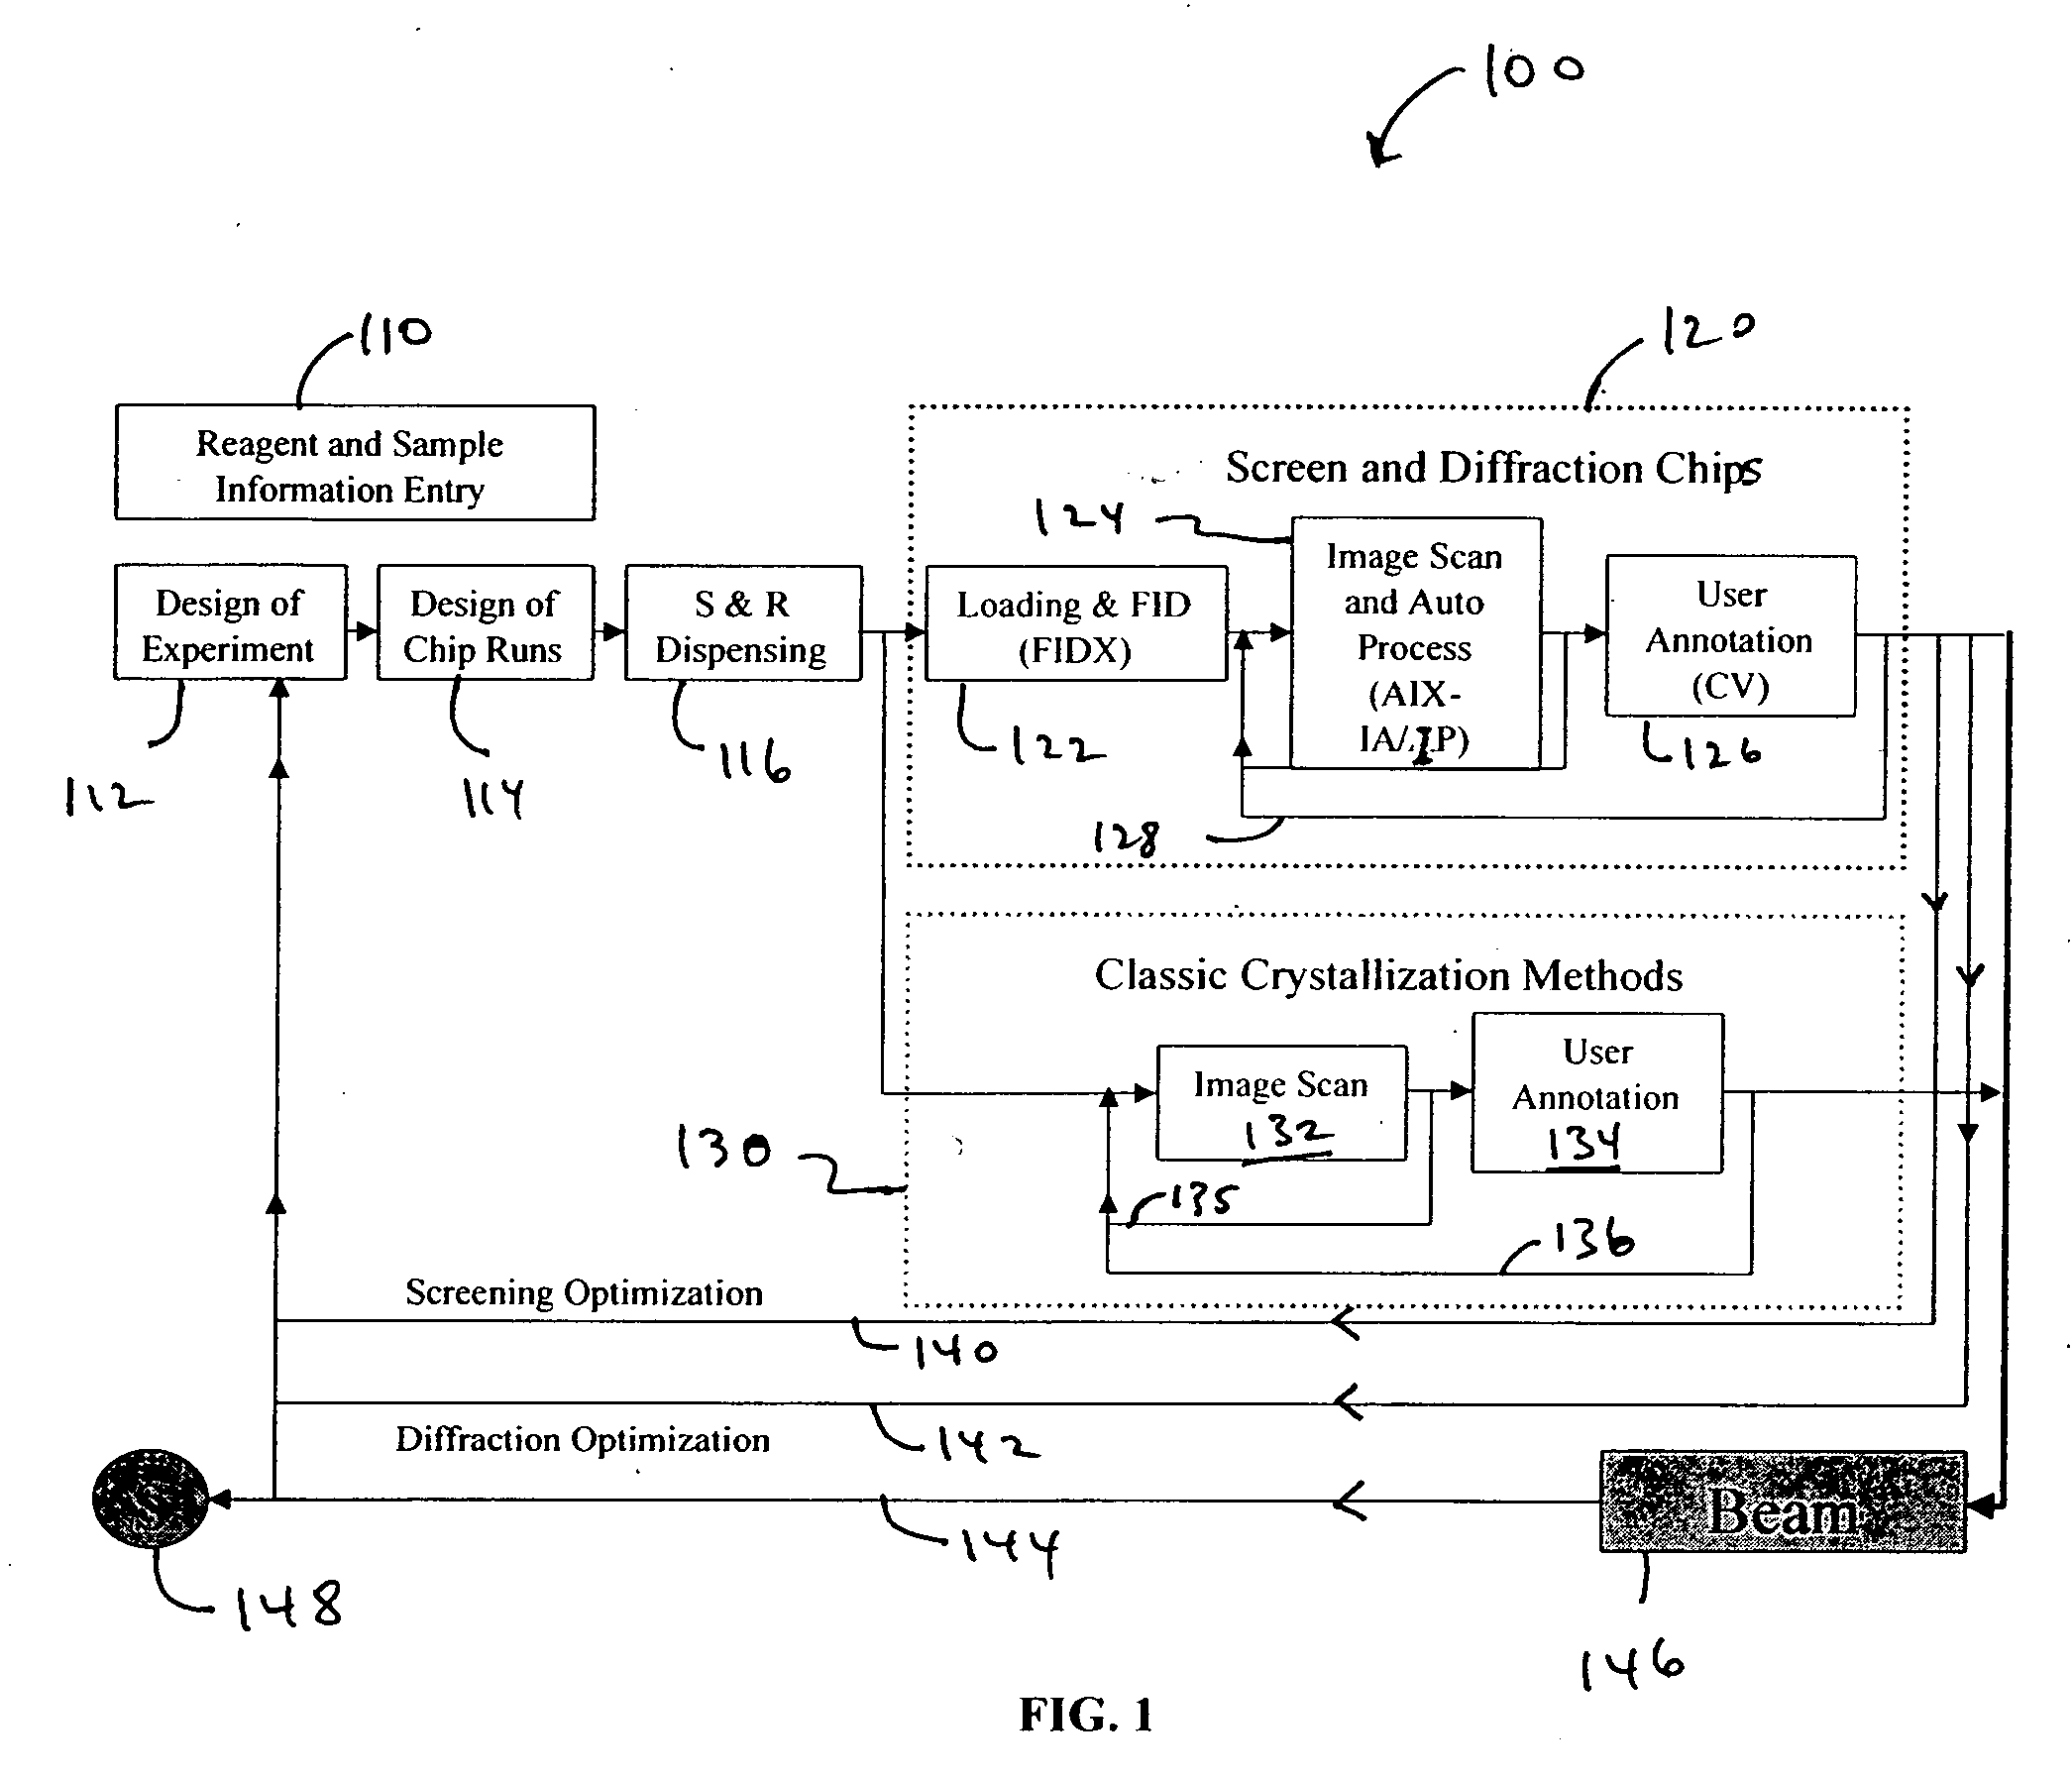 Analysis engine and database for manipulating parameters for fluidic systems on a chip